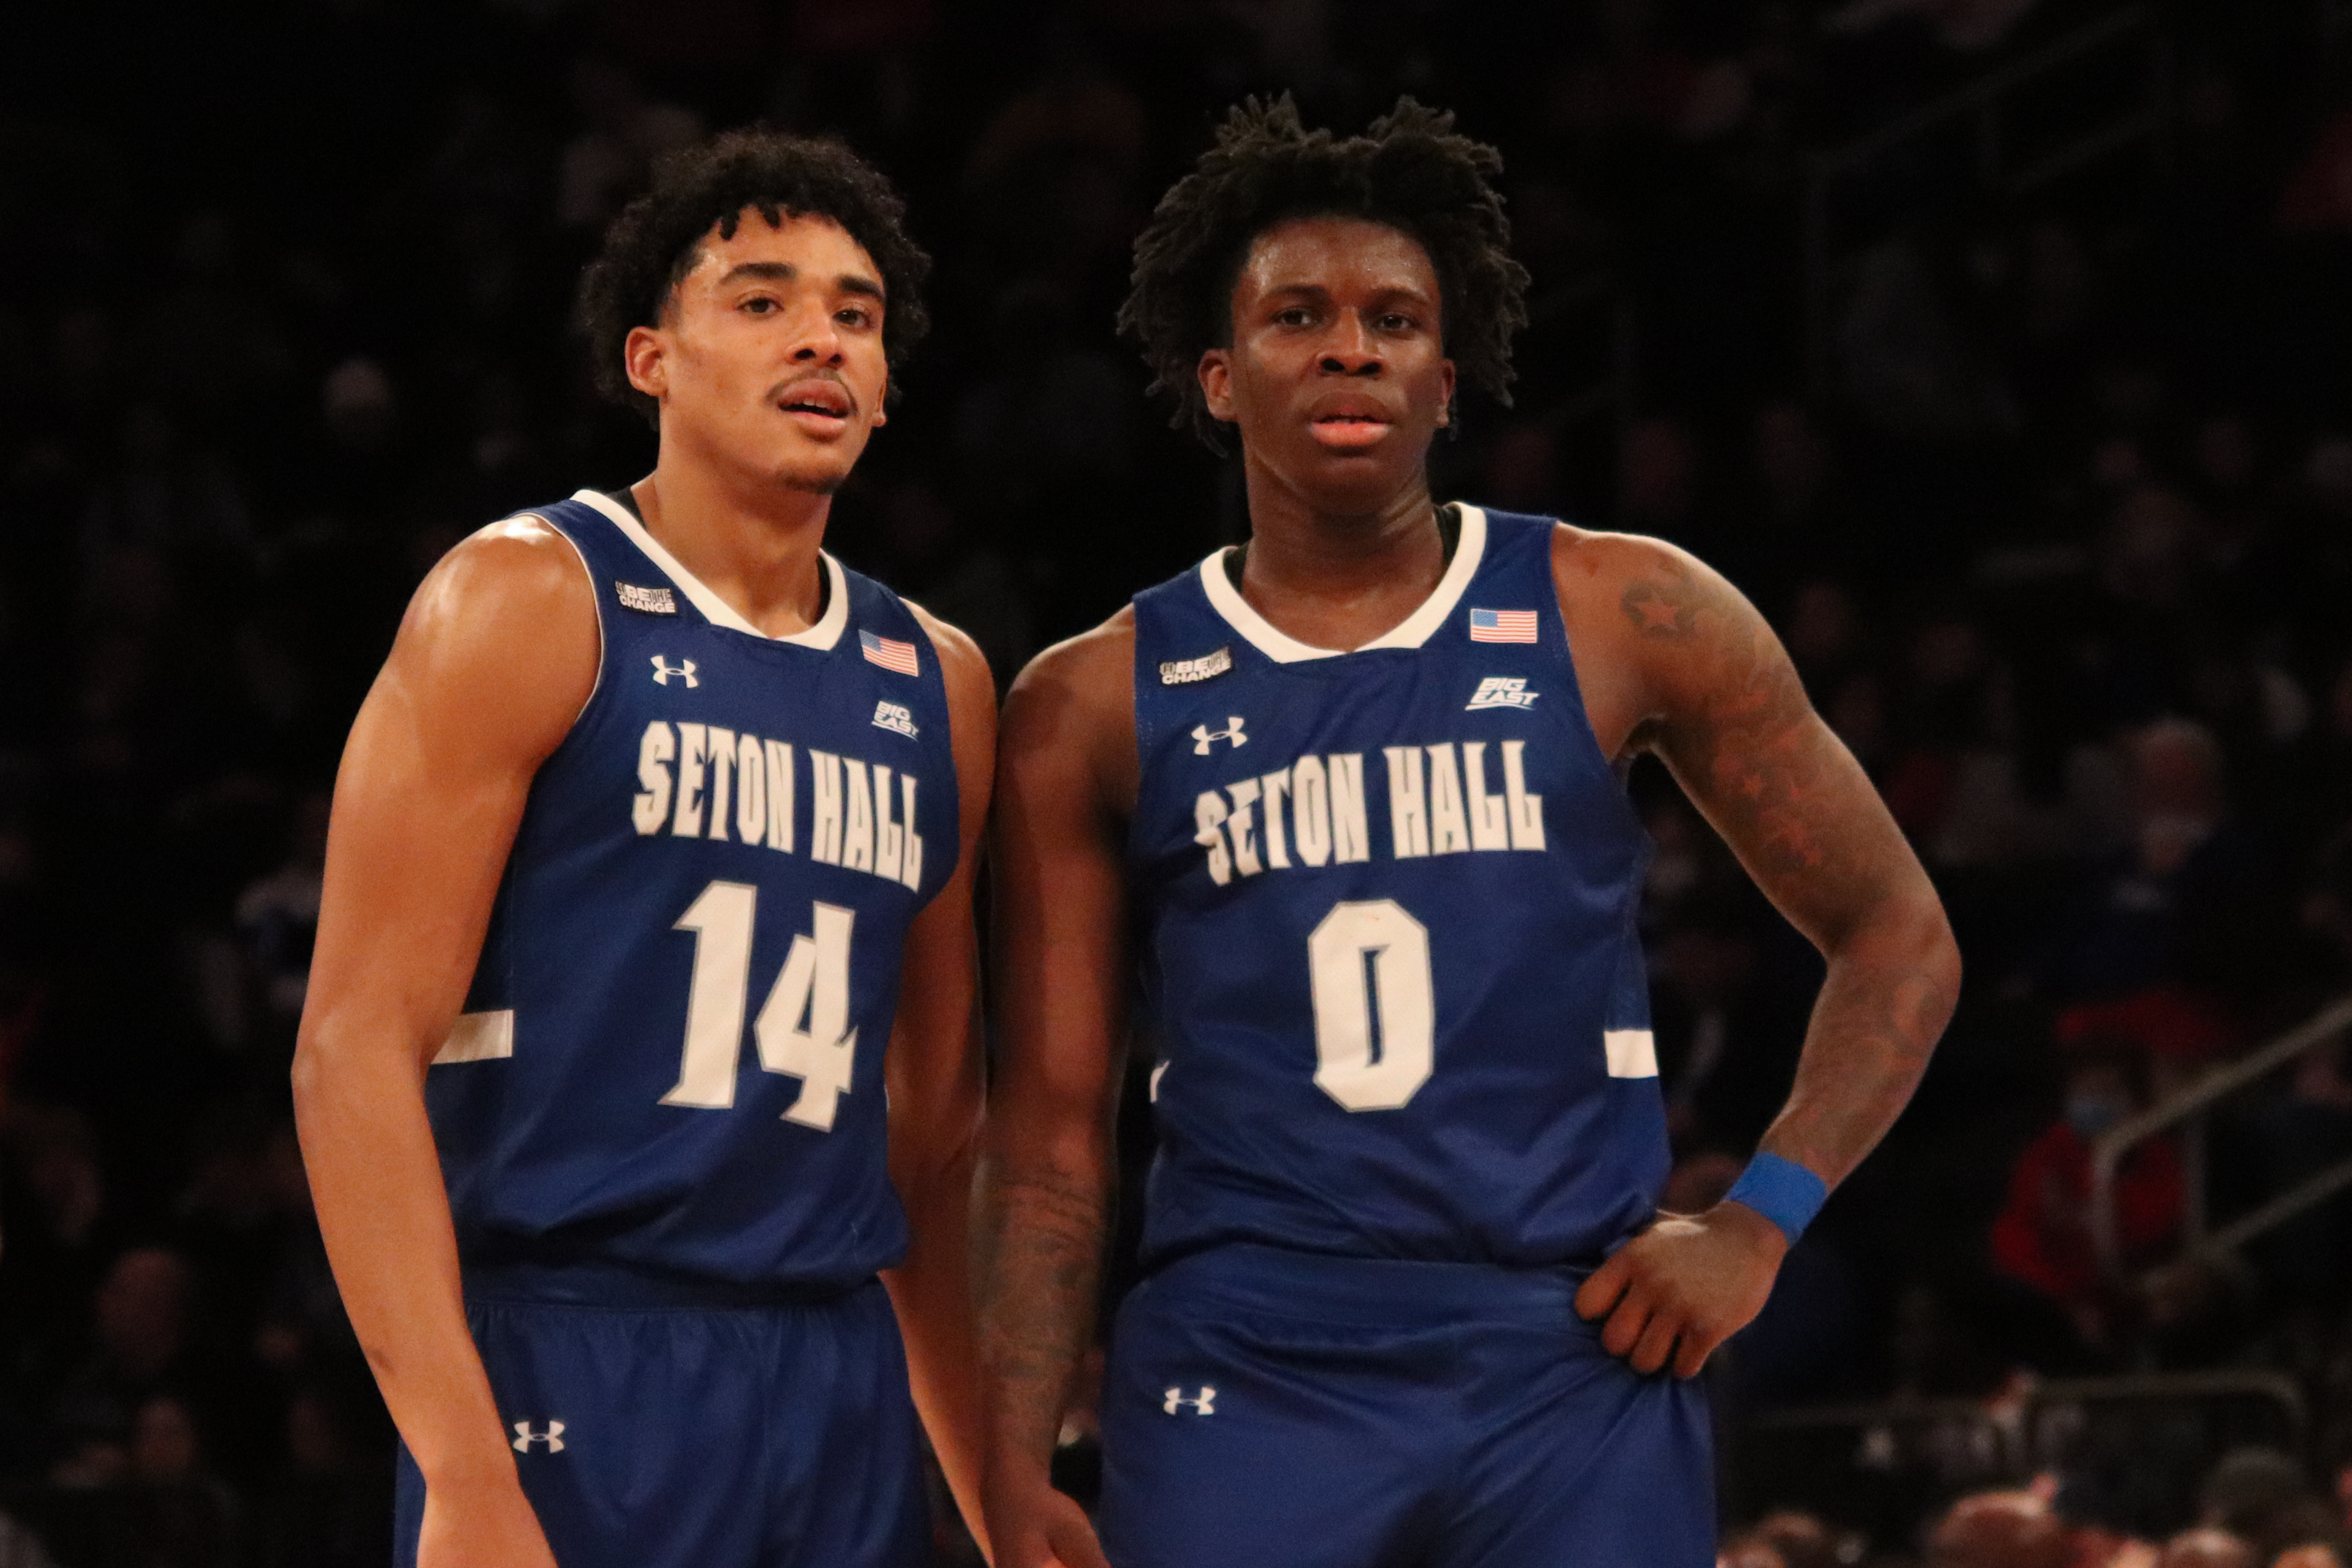 Seton Hall's Jared Rhoden and Kadary Richmond stand on the court during a road game at St. John's.